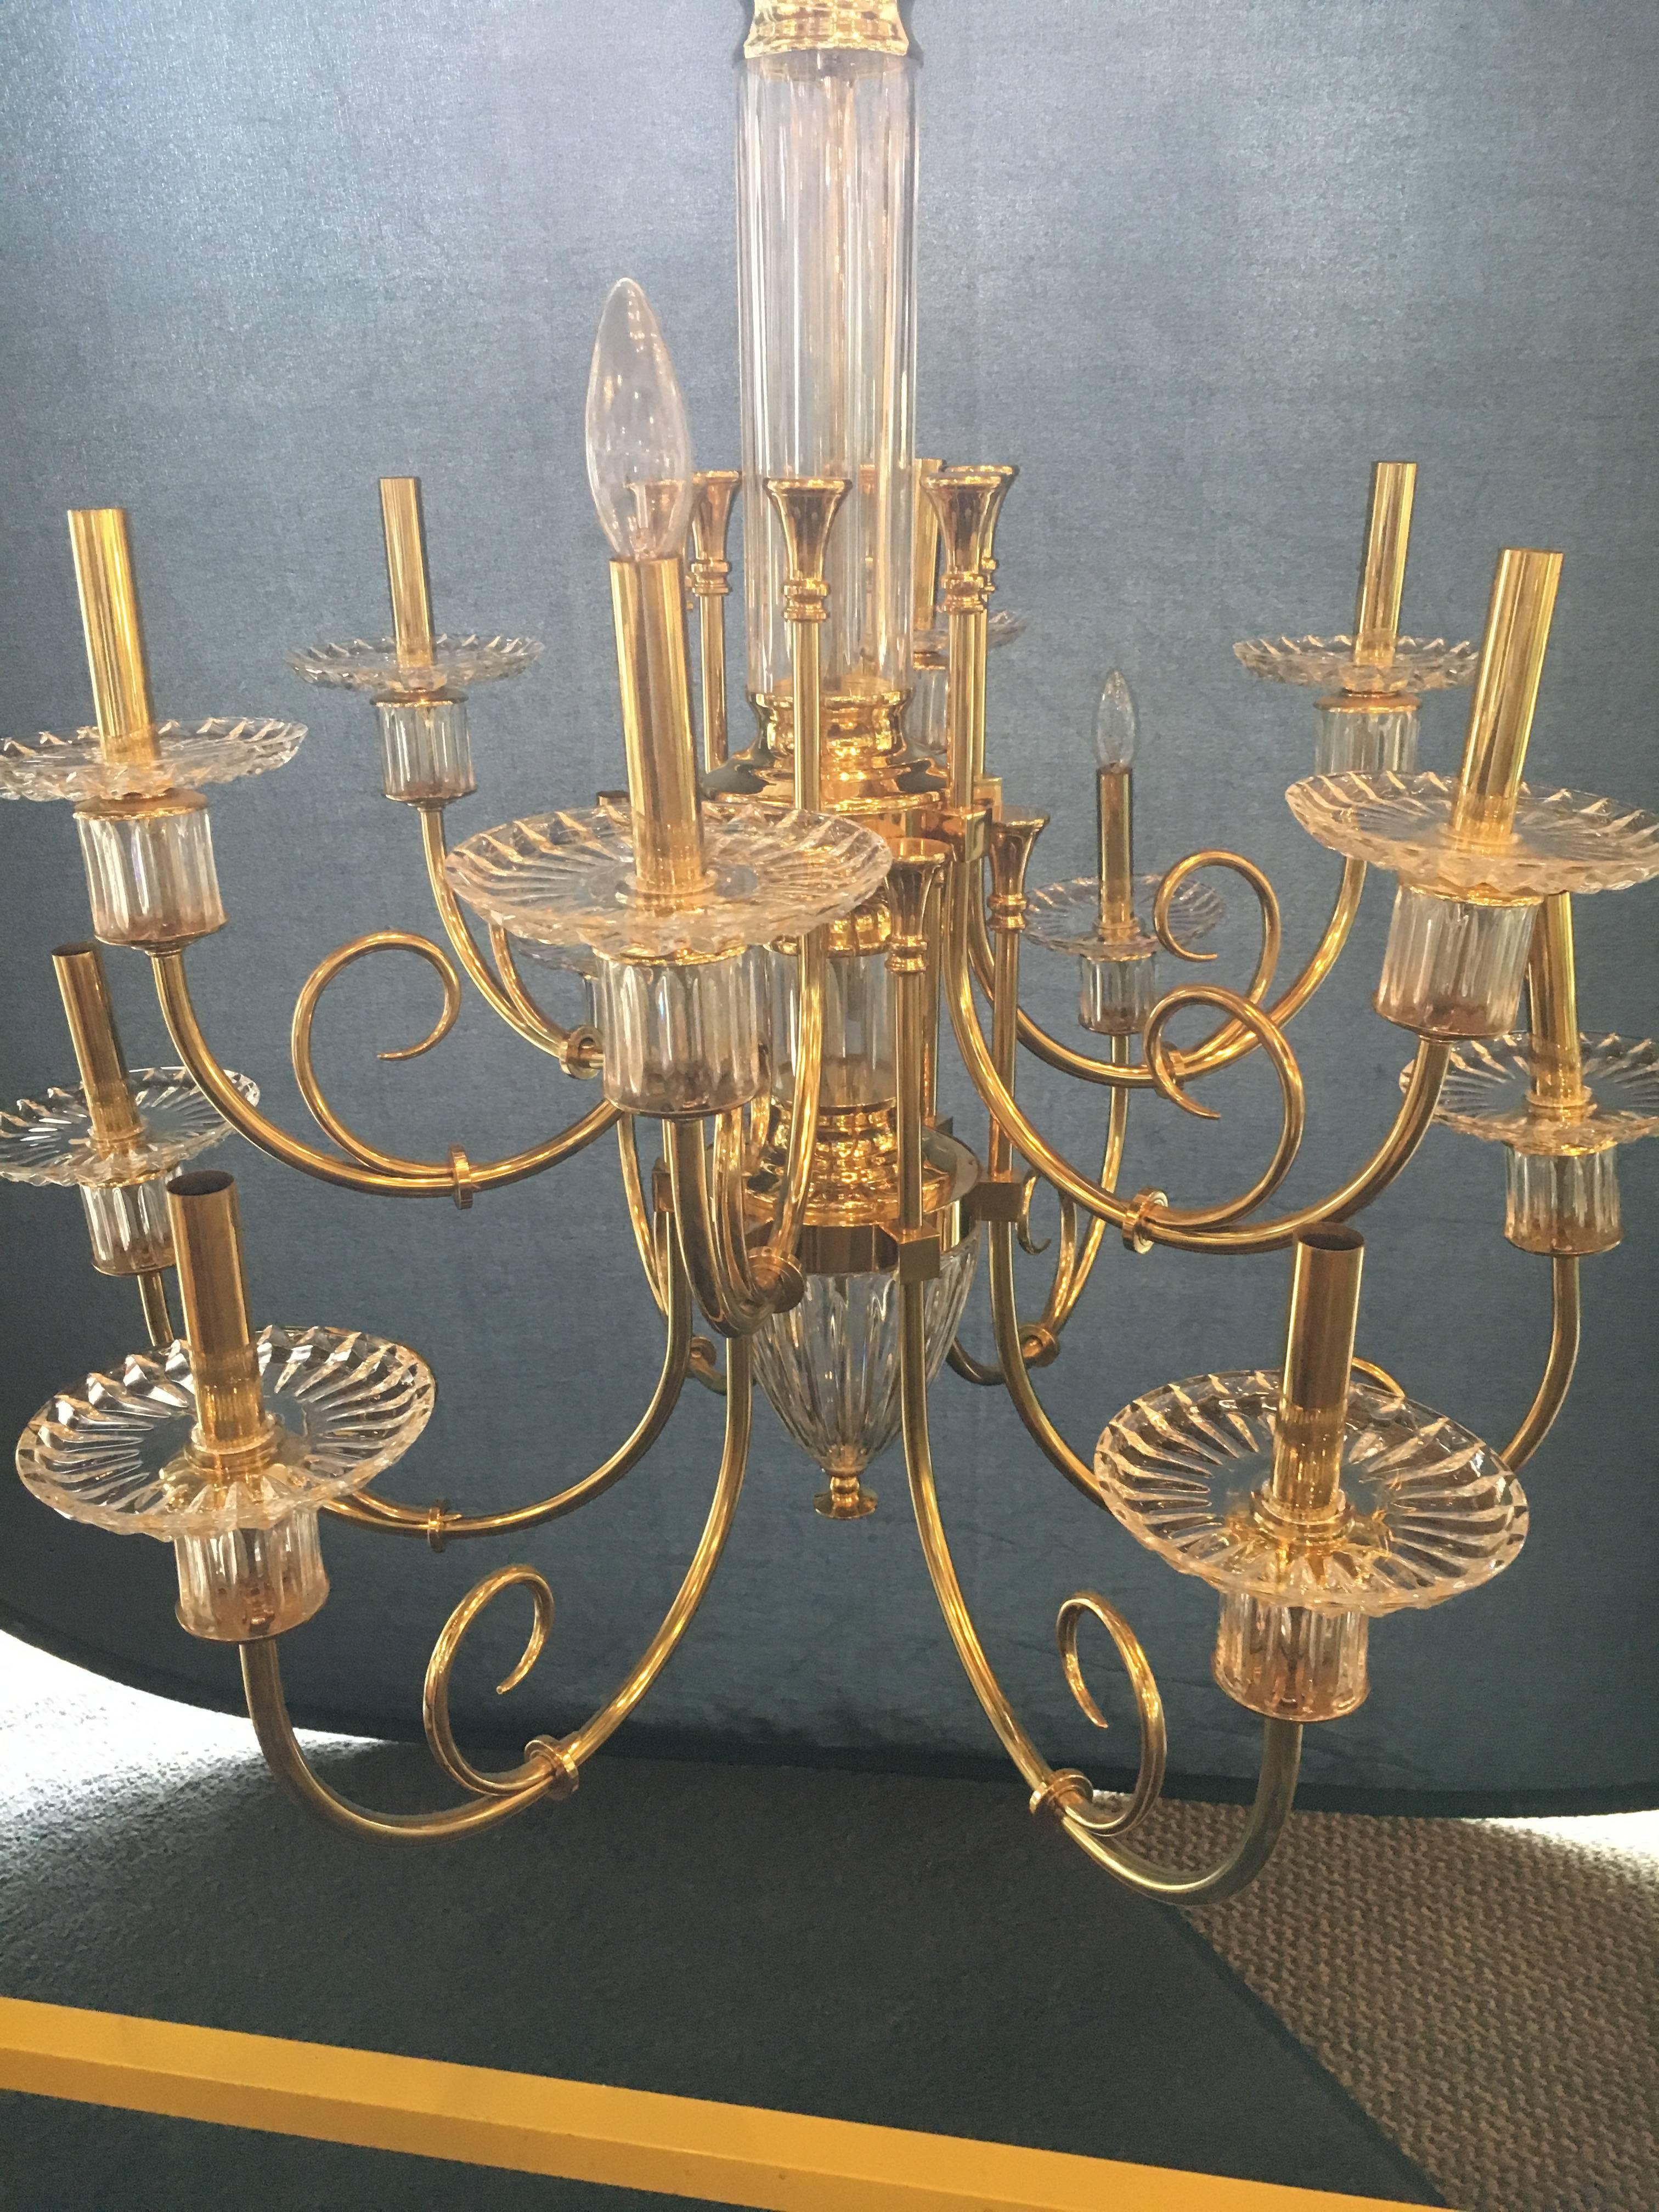 Custom quality at its finest. This highly decorative 12-light bronze and cut crystal chandelier with chain and crystal canopy are sure to light up any room. In a word this Hollywood Regency style chandelier is too sweet. The crystal and bronze